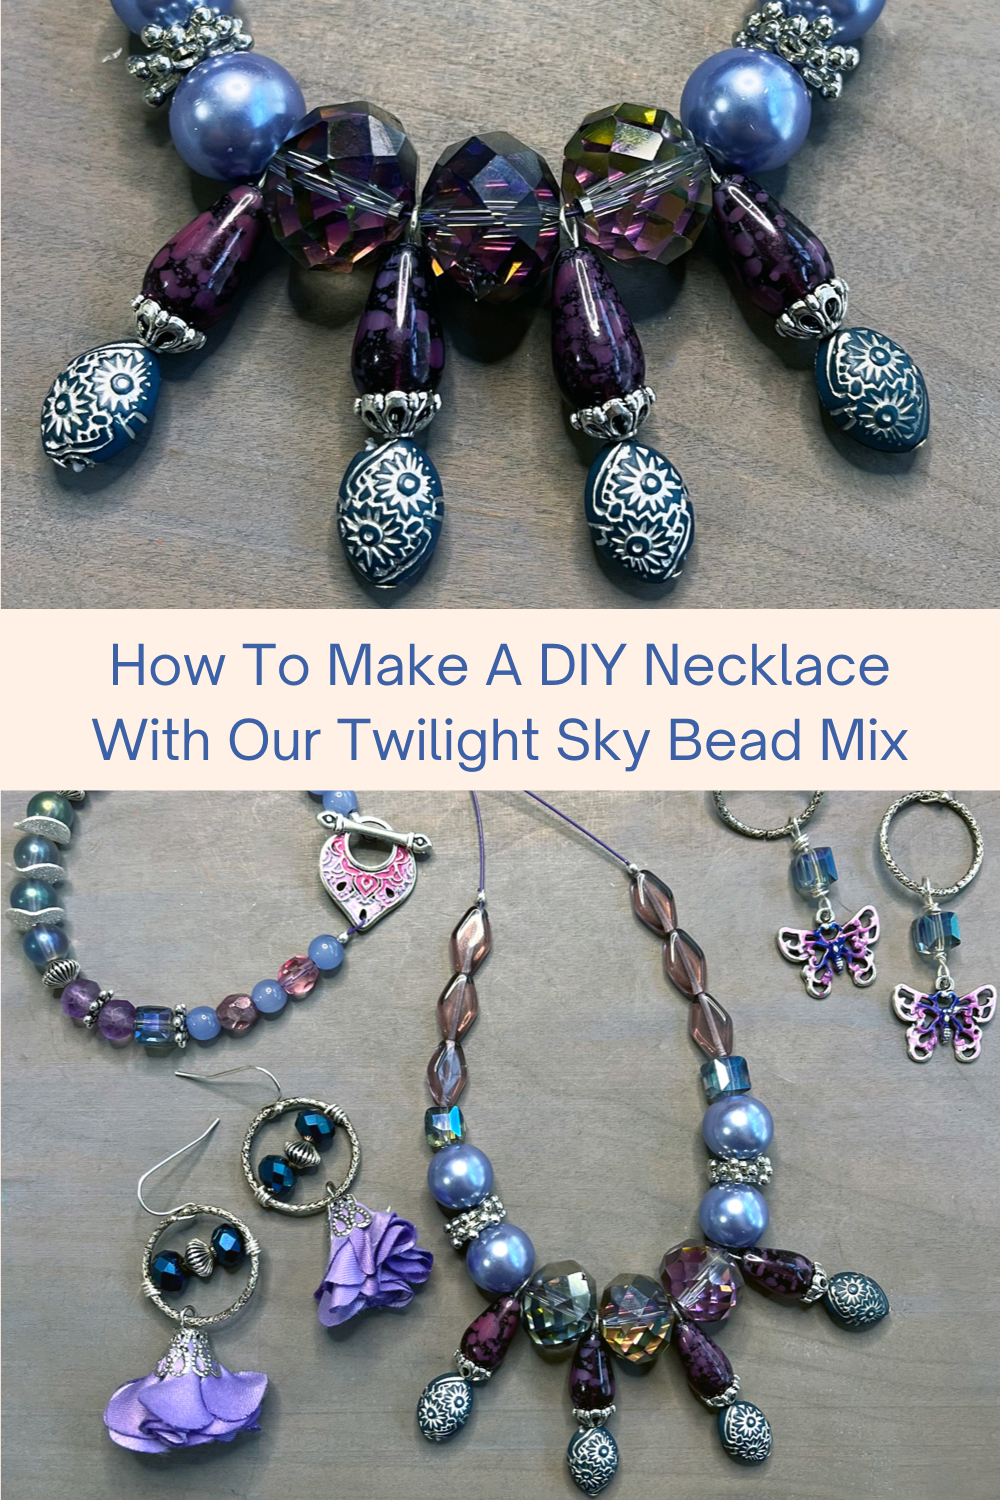 How To Make A DIY Necklace With Our Twilight Sky Bead Mix Collage